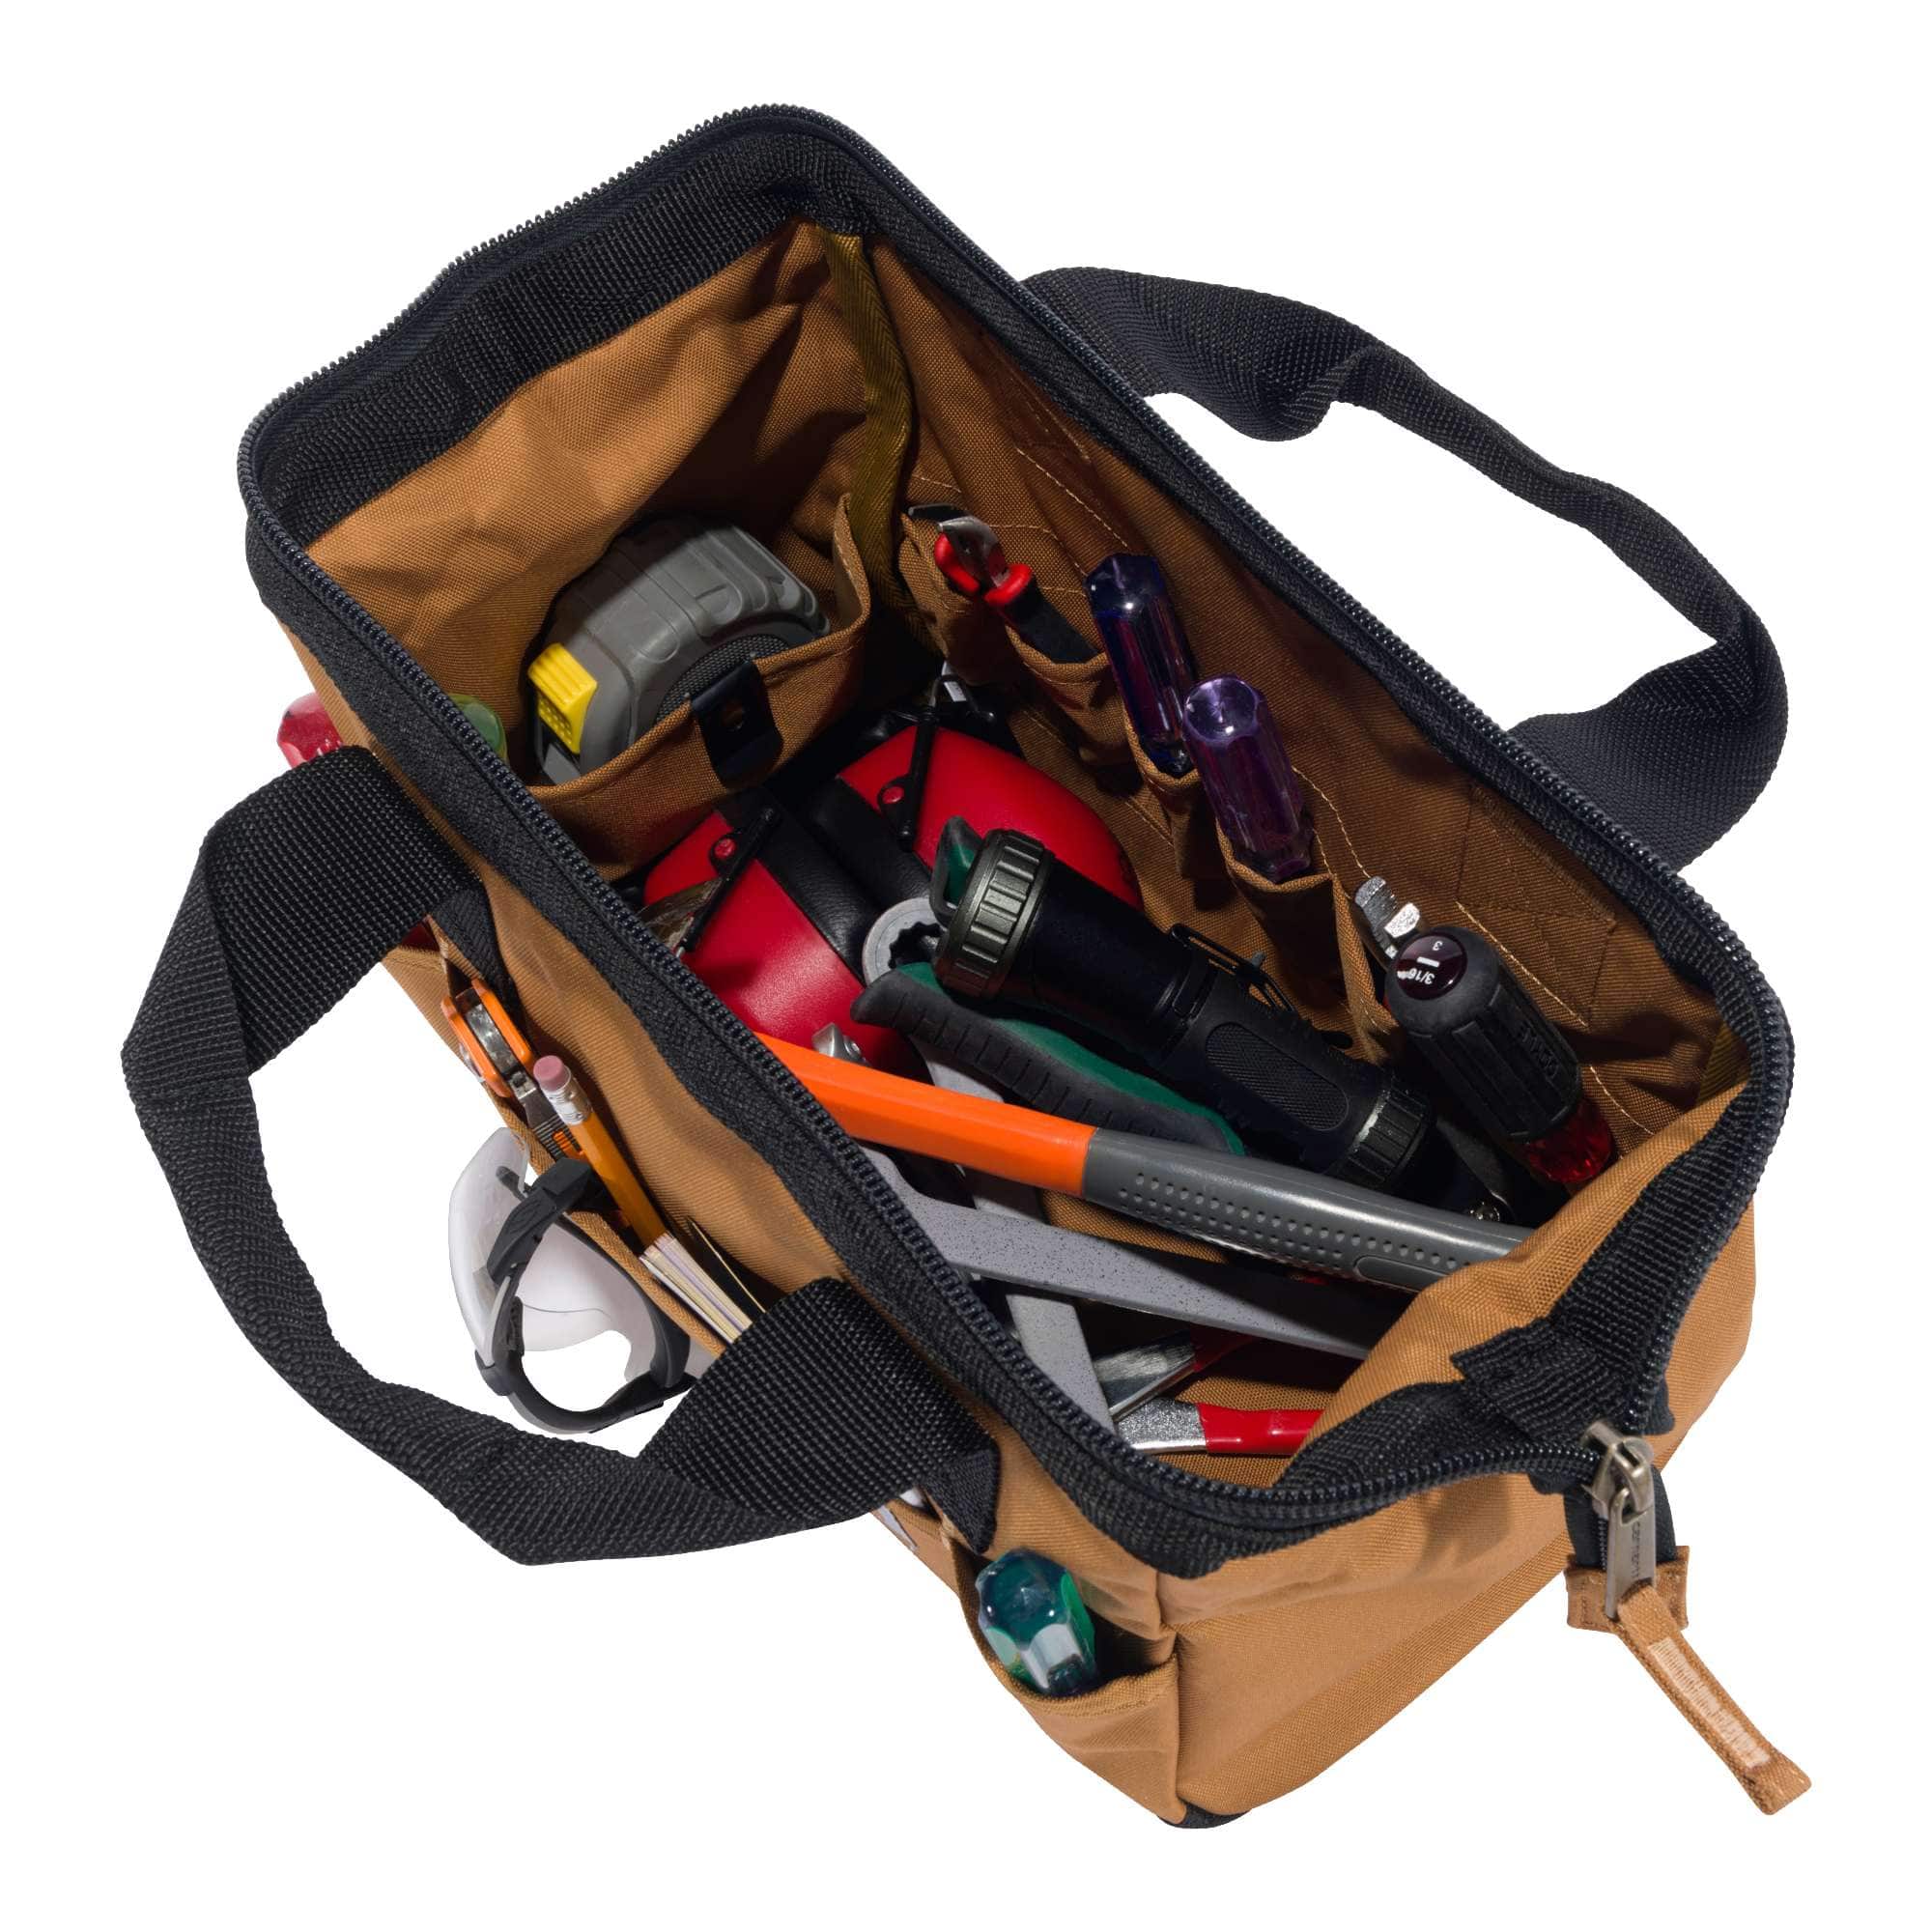 13-Inch 15 Pocket Midweight Tool Bag